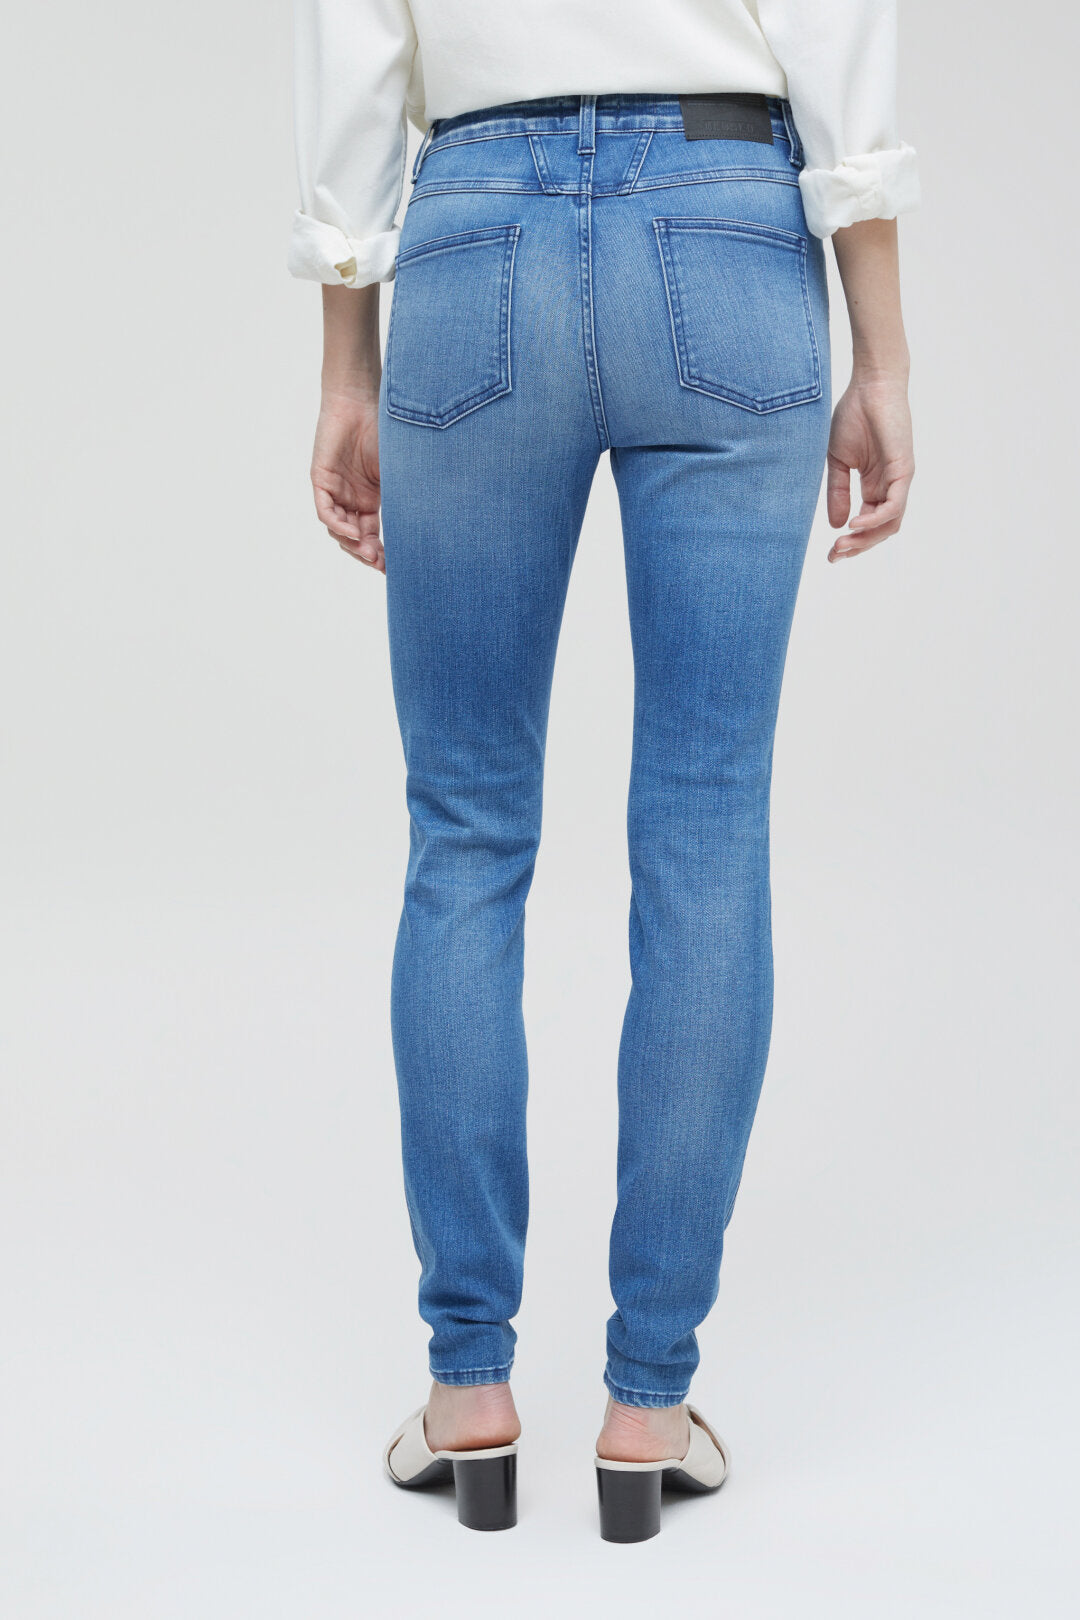 CLOSED SKINNY PUSHER LONG MID BLUE - S. LABELS